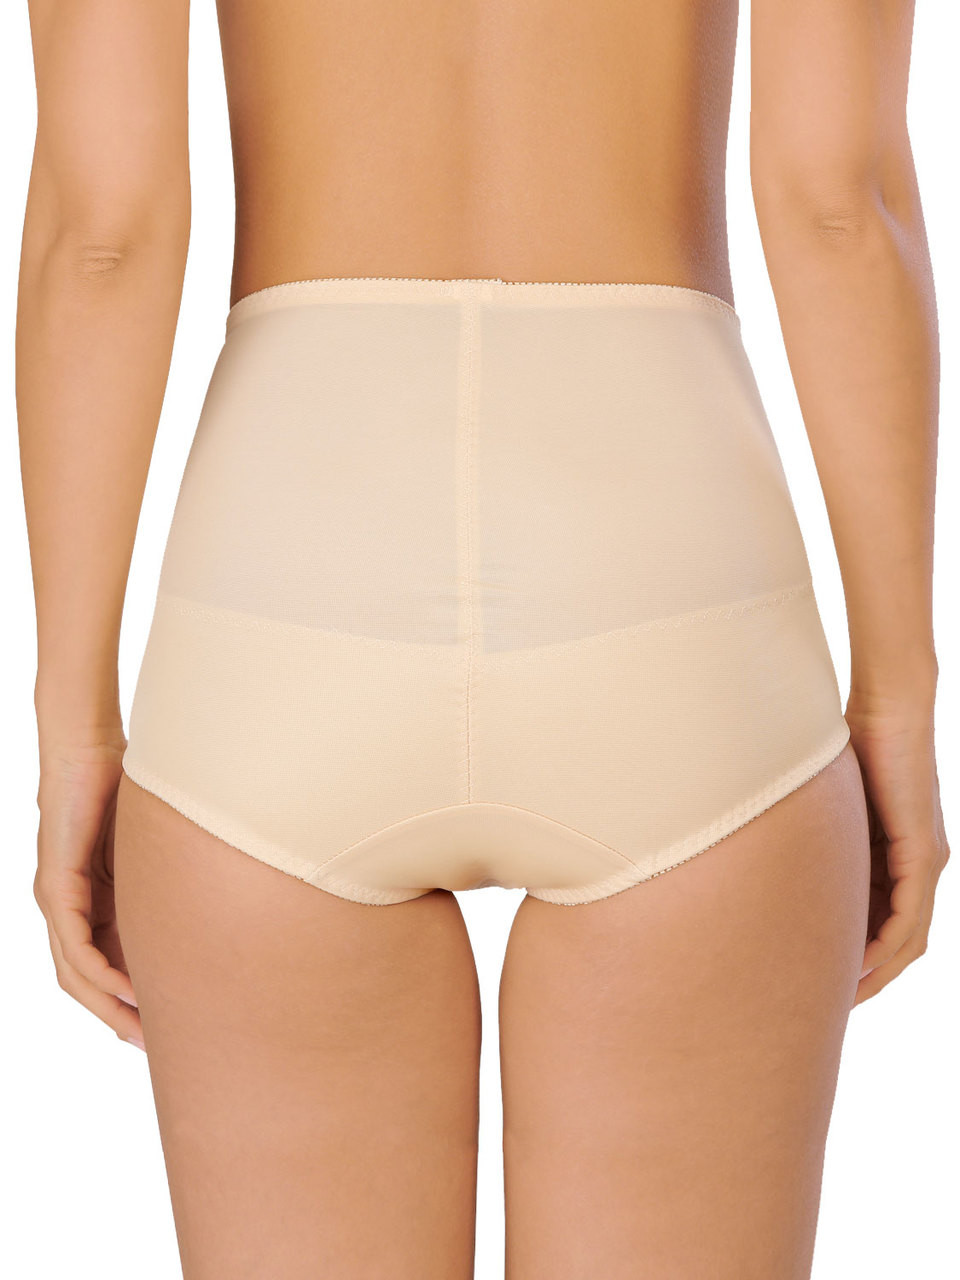 Control Panty Girdle With Reinforced Front Panel High Leg (L-7XL) by  Naturana 0319